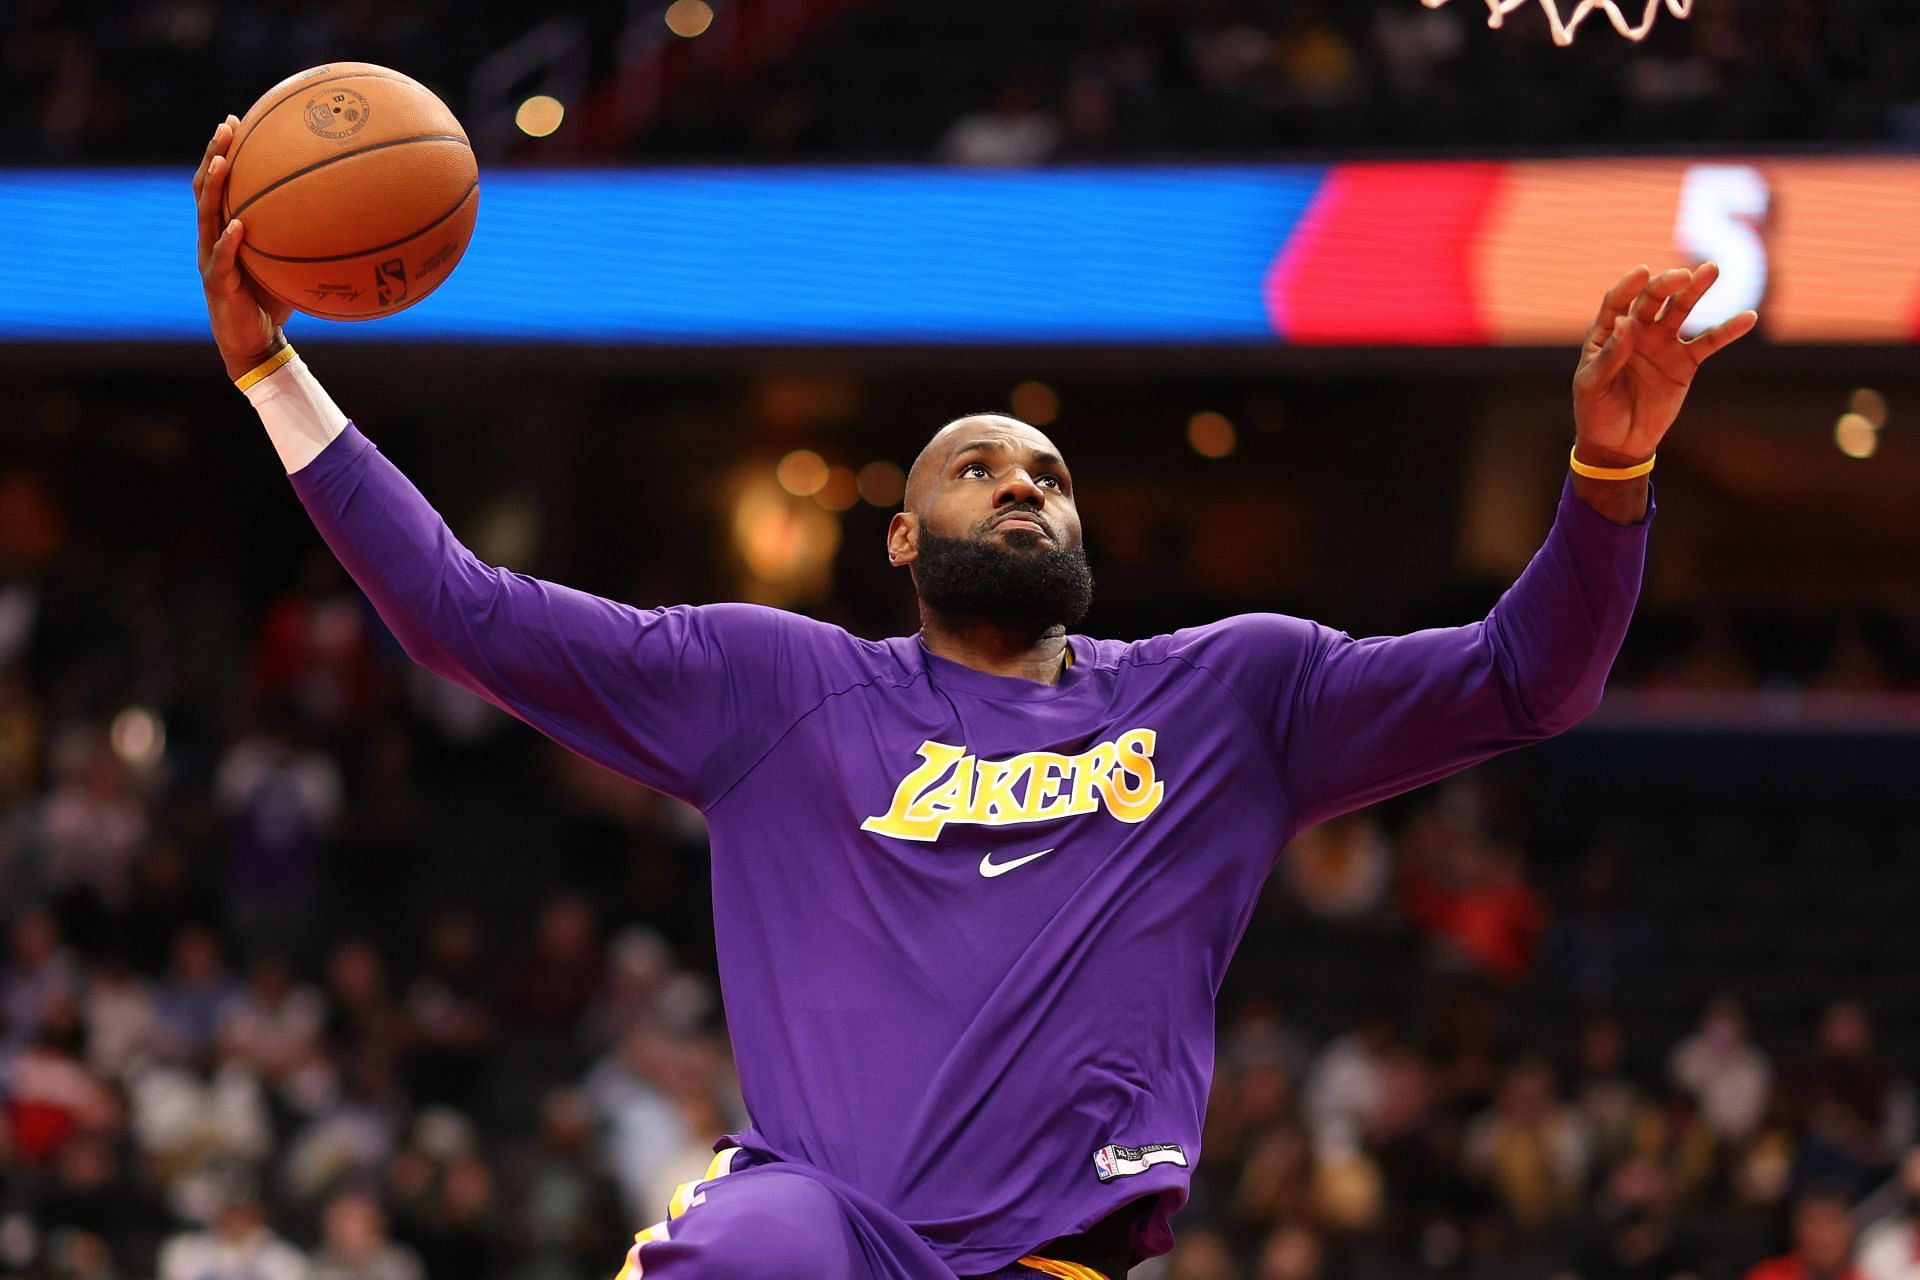 LeBron James of the LA Lakers leads the NBA in scoring at 30.1 points per game.